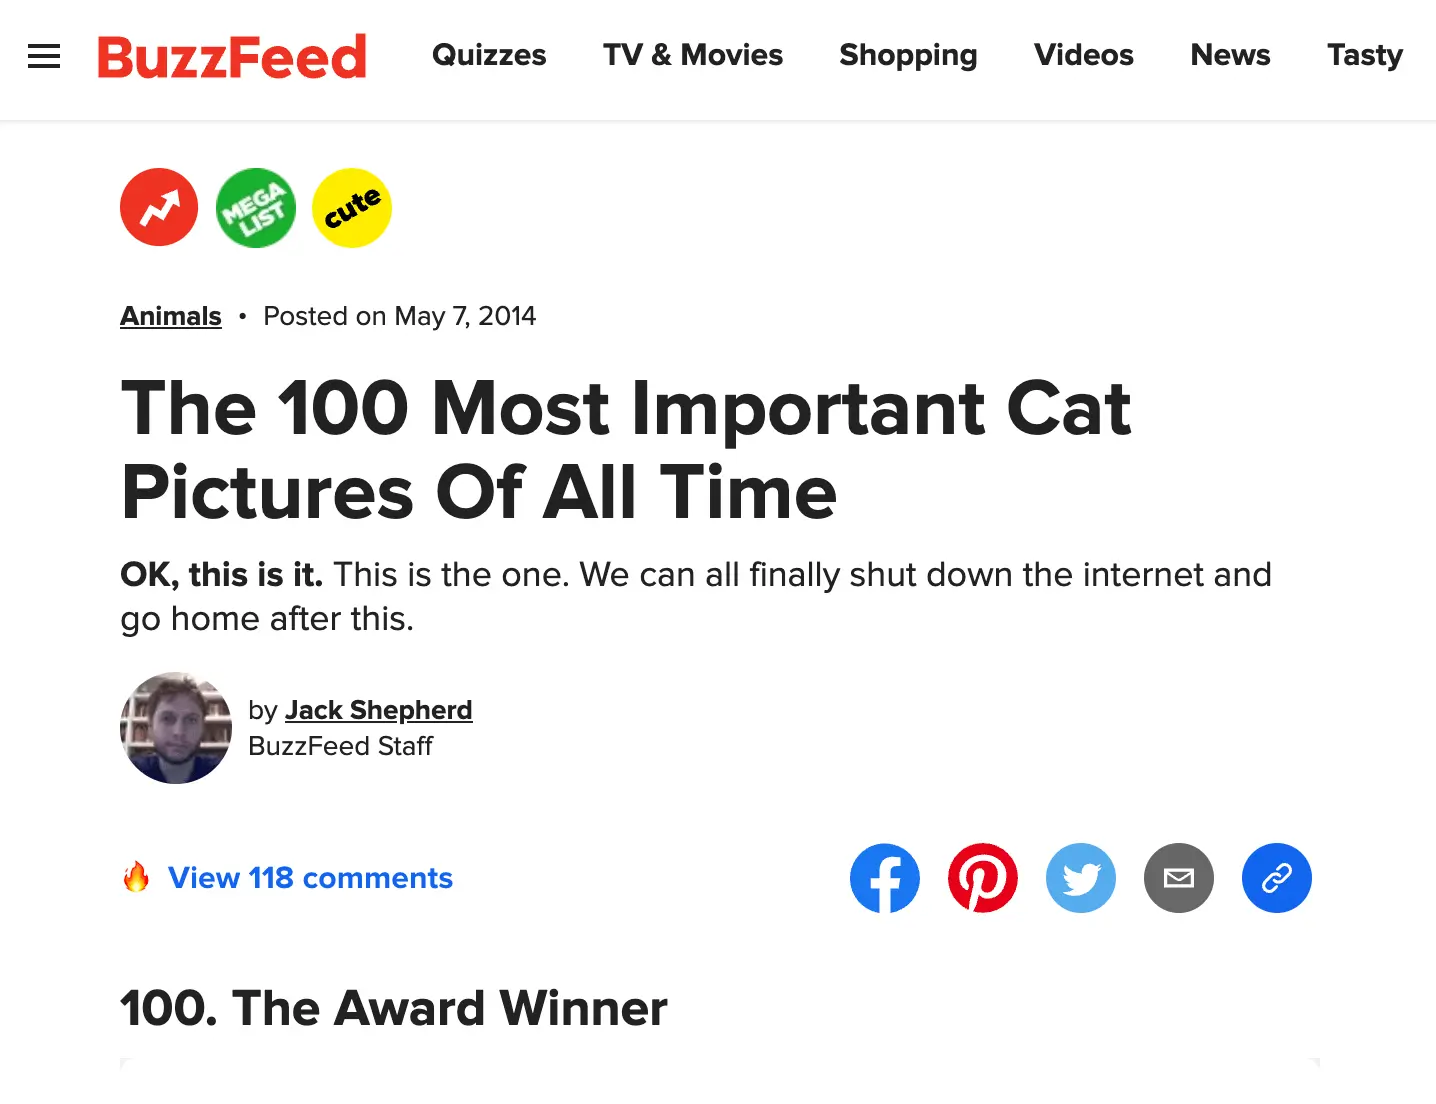 Screenshot of one of Buzzfeed's 'Definitive' lists